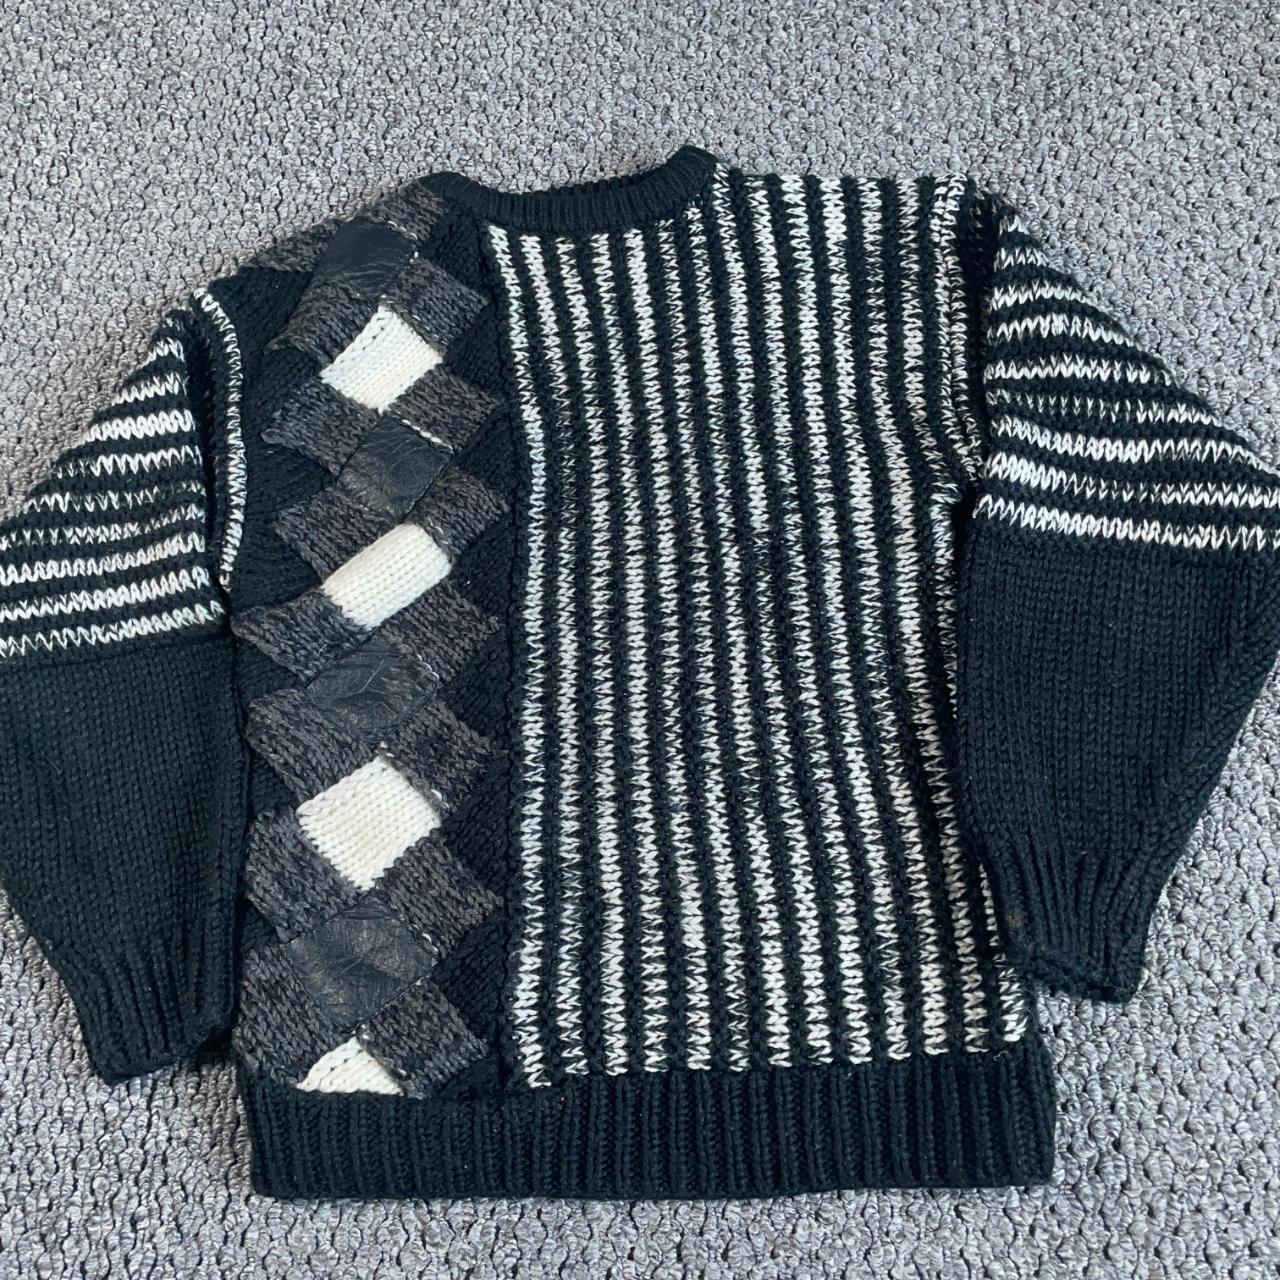 80s Vintage Leather trimmed knit sweater